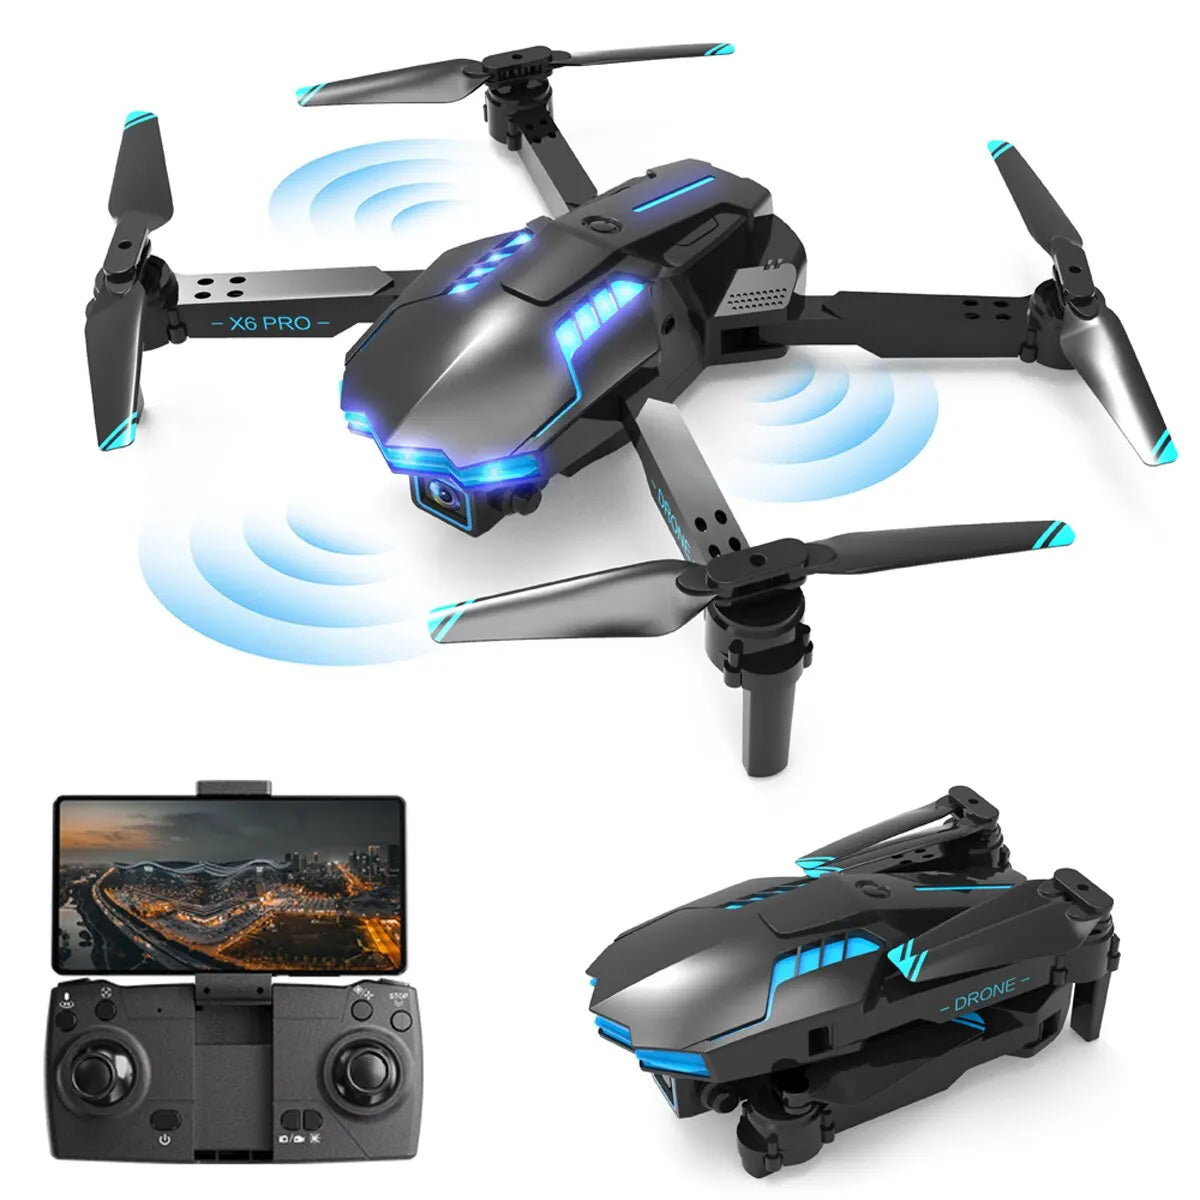 X6 Optical Flow Positioning Foldable Drone Dual Camera LED Light Auto Linking Obstacle Avoidance Smart Return Emergency Stop